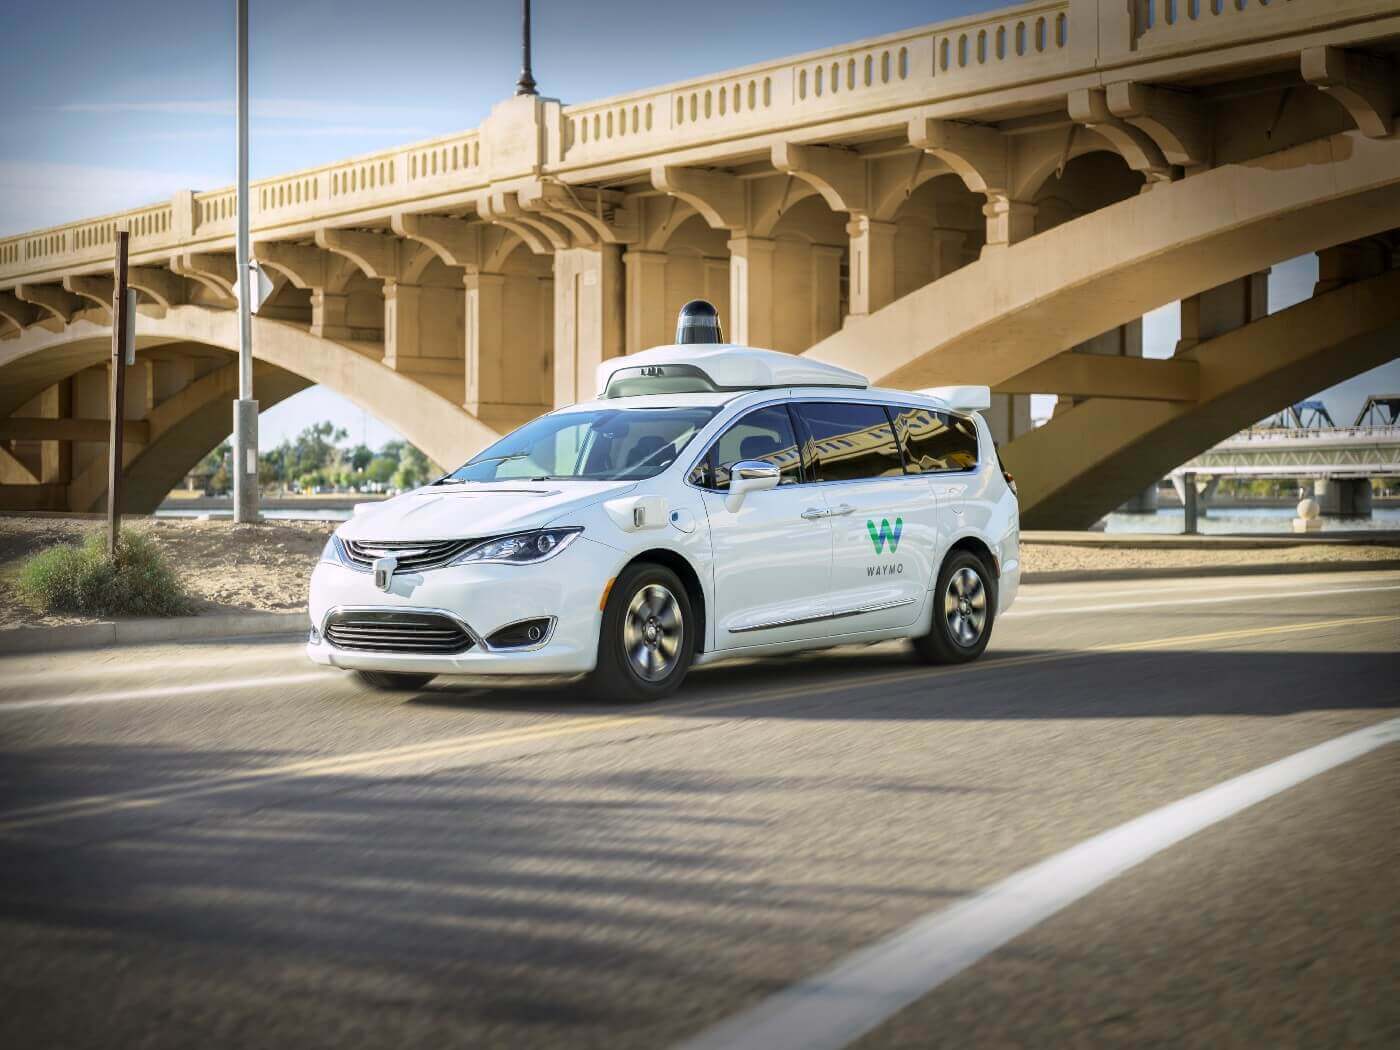 Waymo is close to offering truly driverless rides with no safety driver